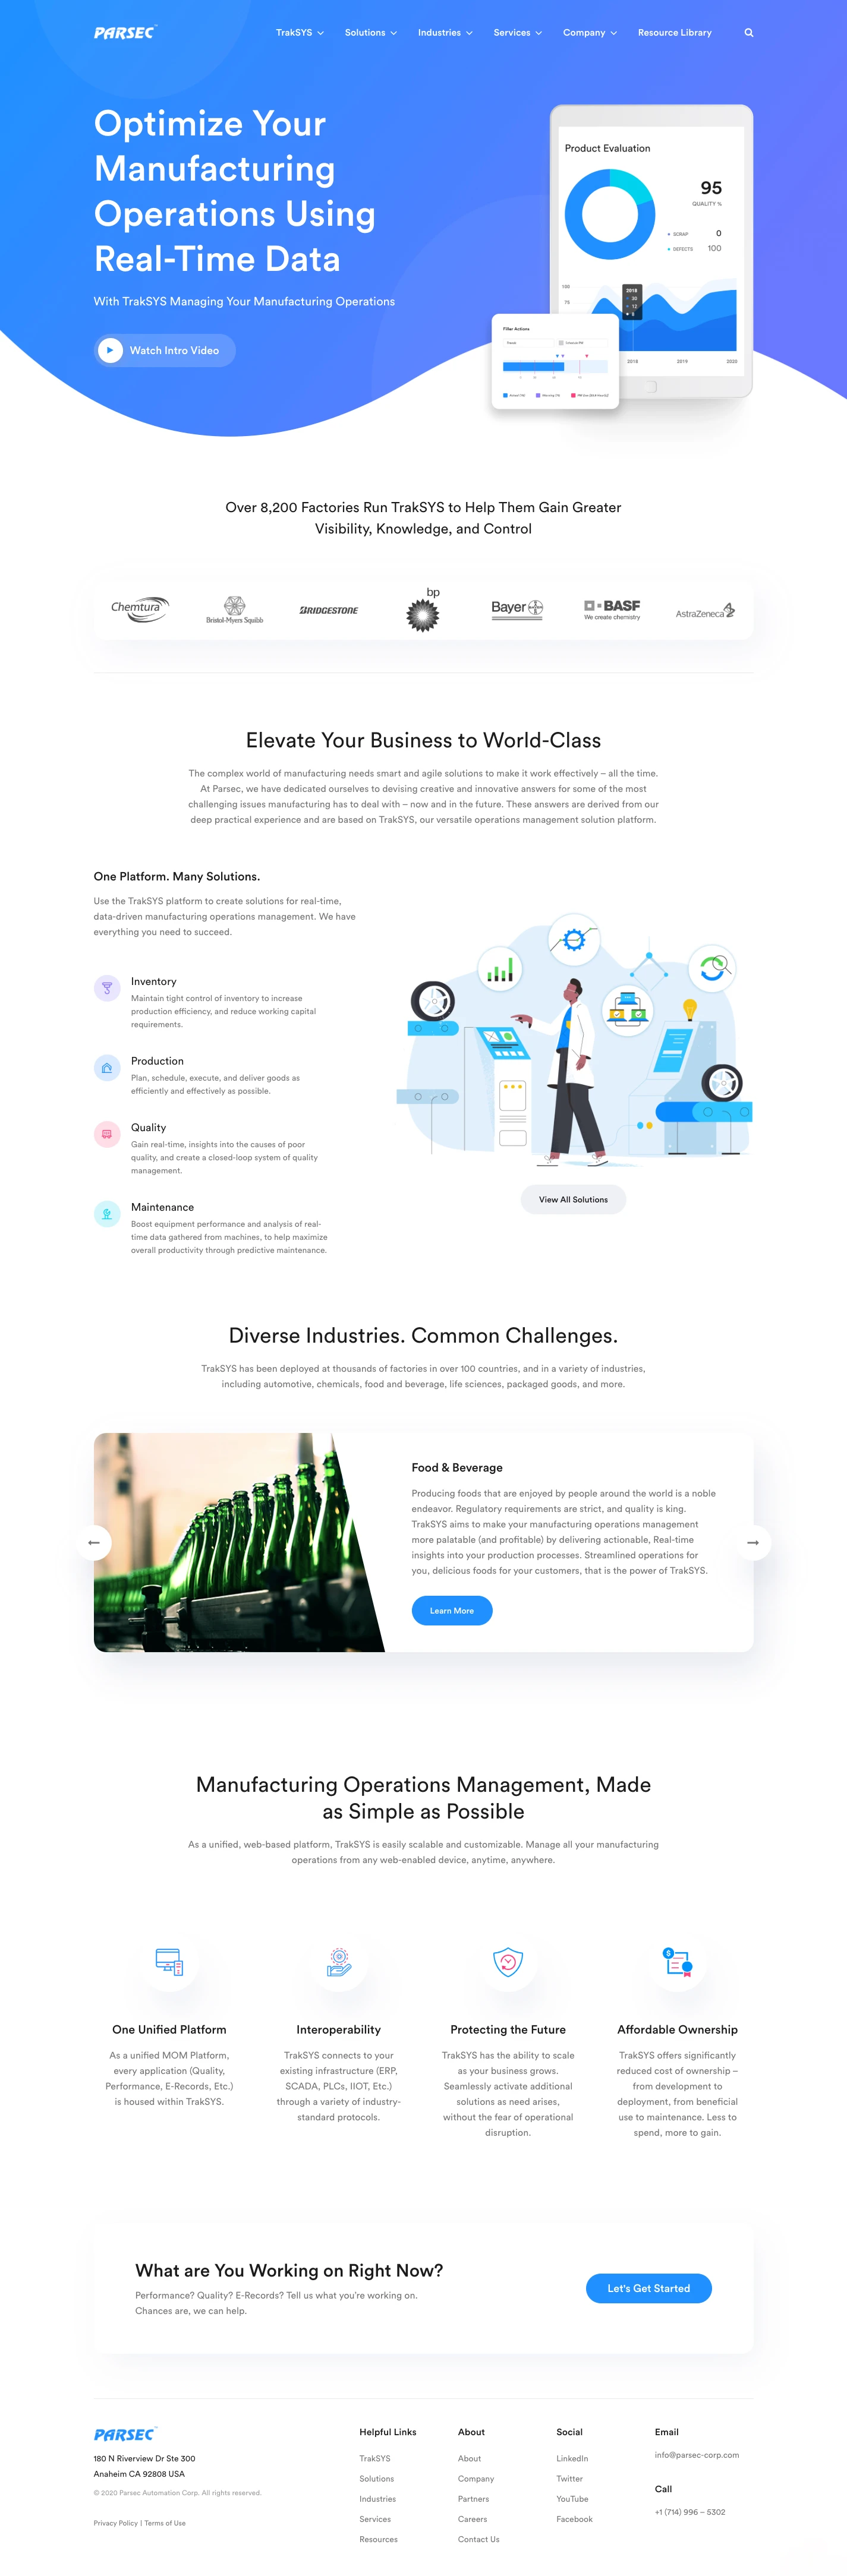 Parsec Landing Page Example: Optimize your manufacturing operations using real-time data. At Parsec we are on a mission to help make your manufacturing operations as simple as possible, by giving you greater visibility, knowledge, and control.